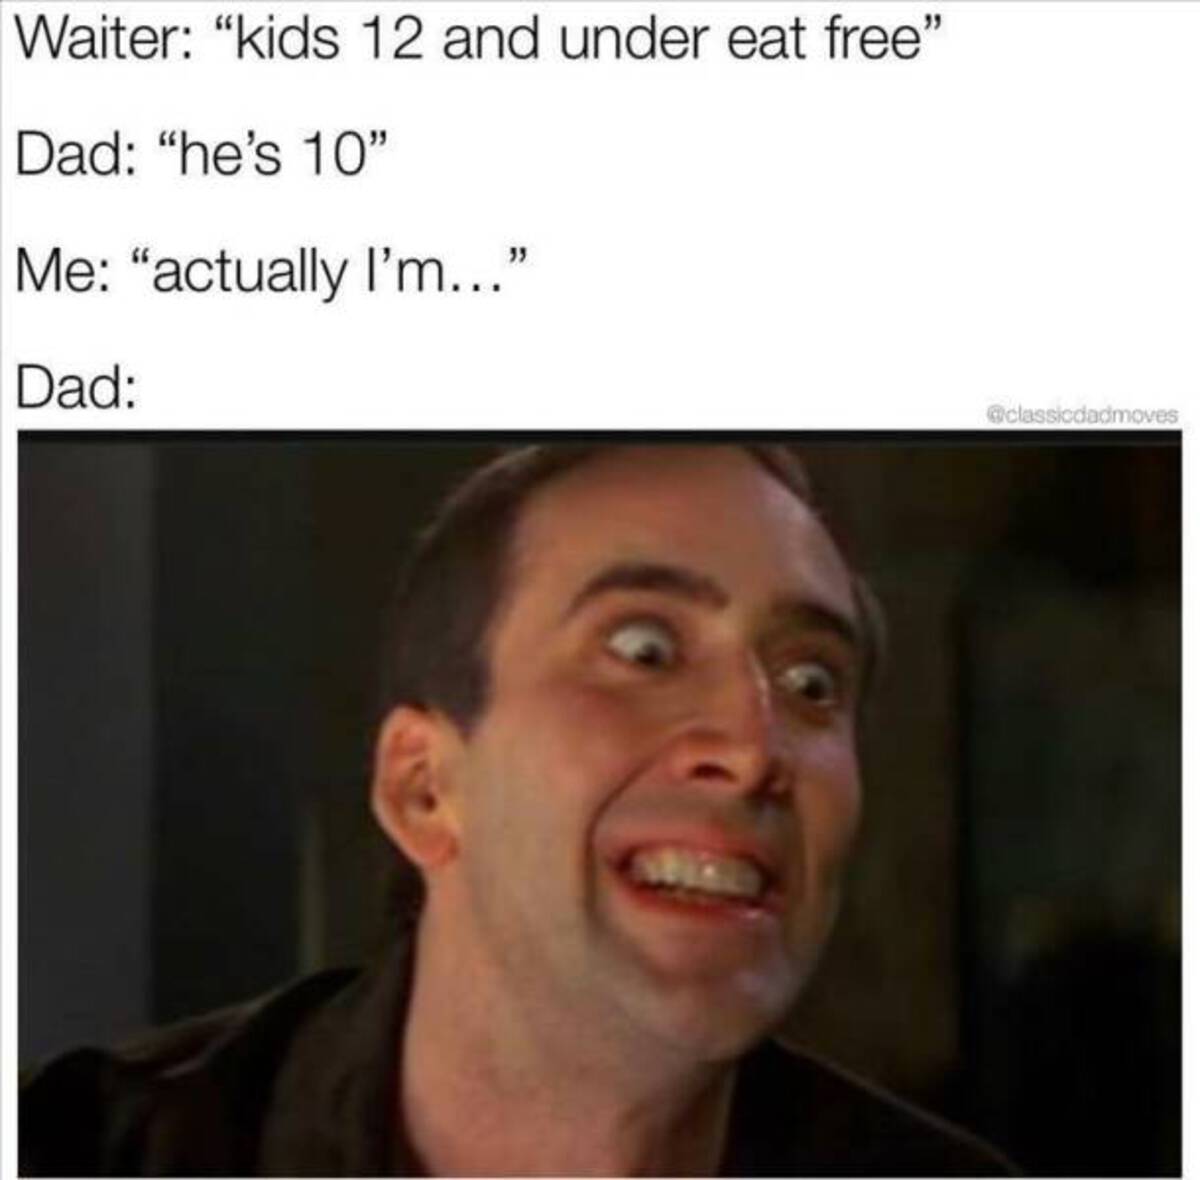 nicolas cage faceoff meme - Waiter "kids 12 and under eat free" Dad "he's 10" Me "actually I'm..." Dad